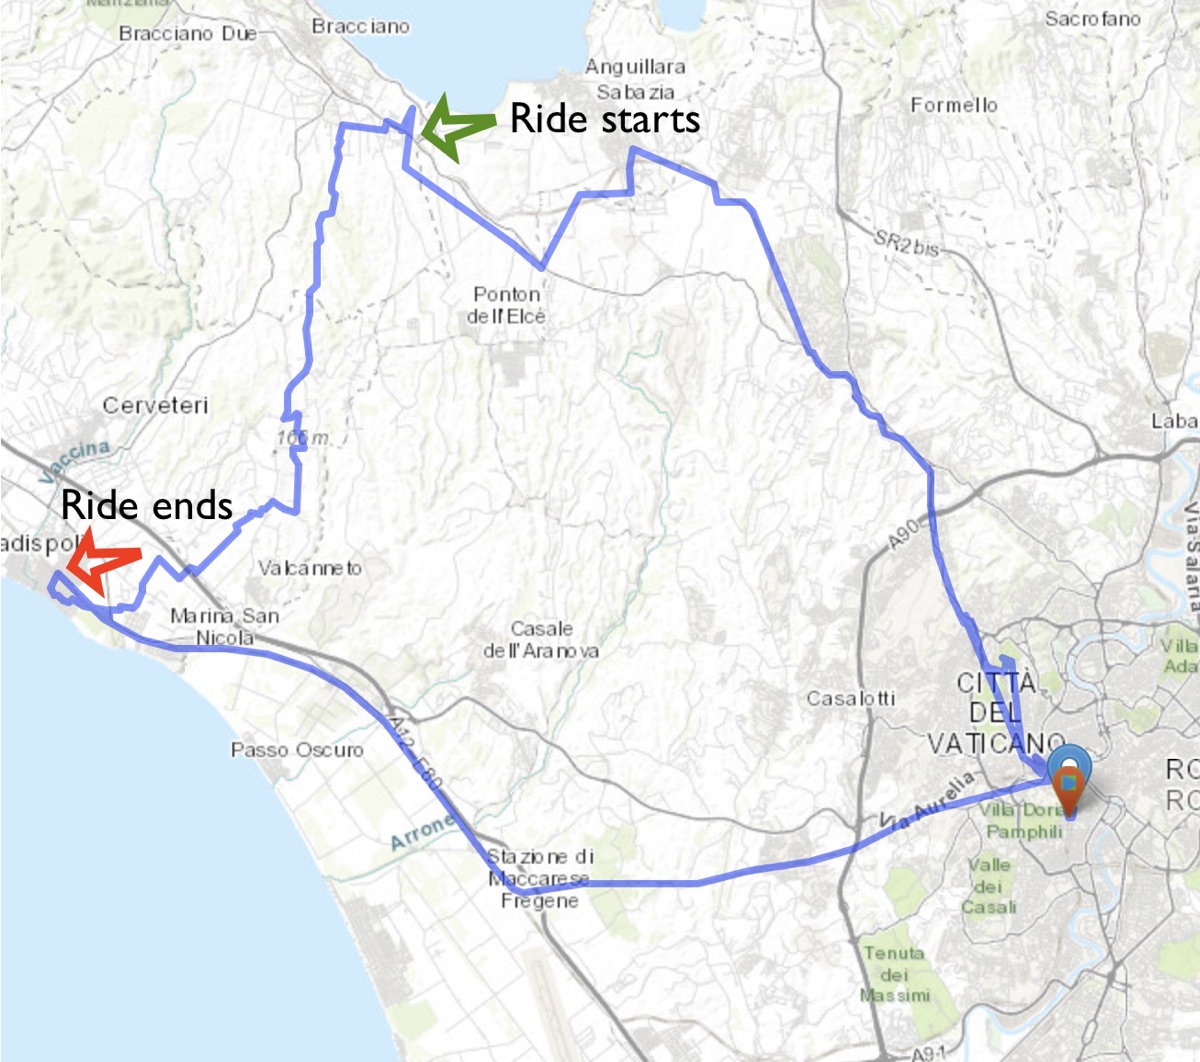 Illustrative image. Static map of the route of my excursion